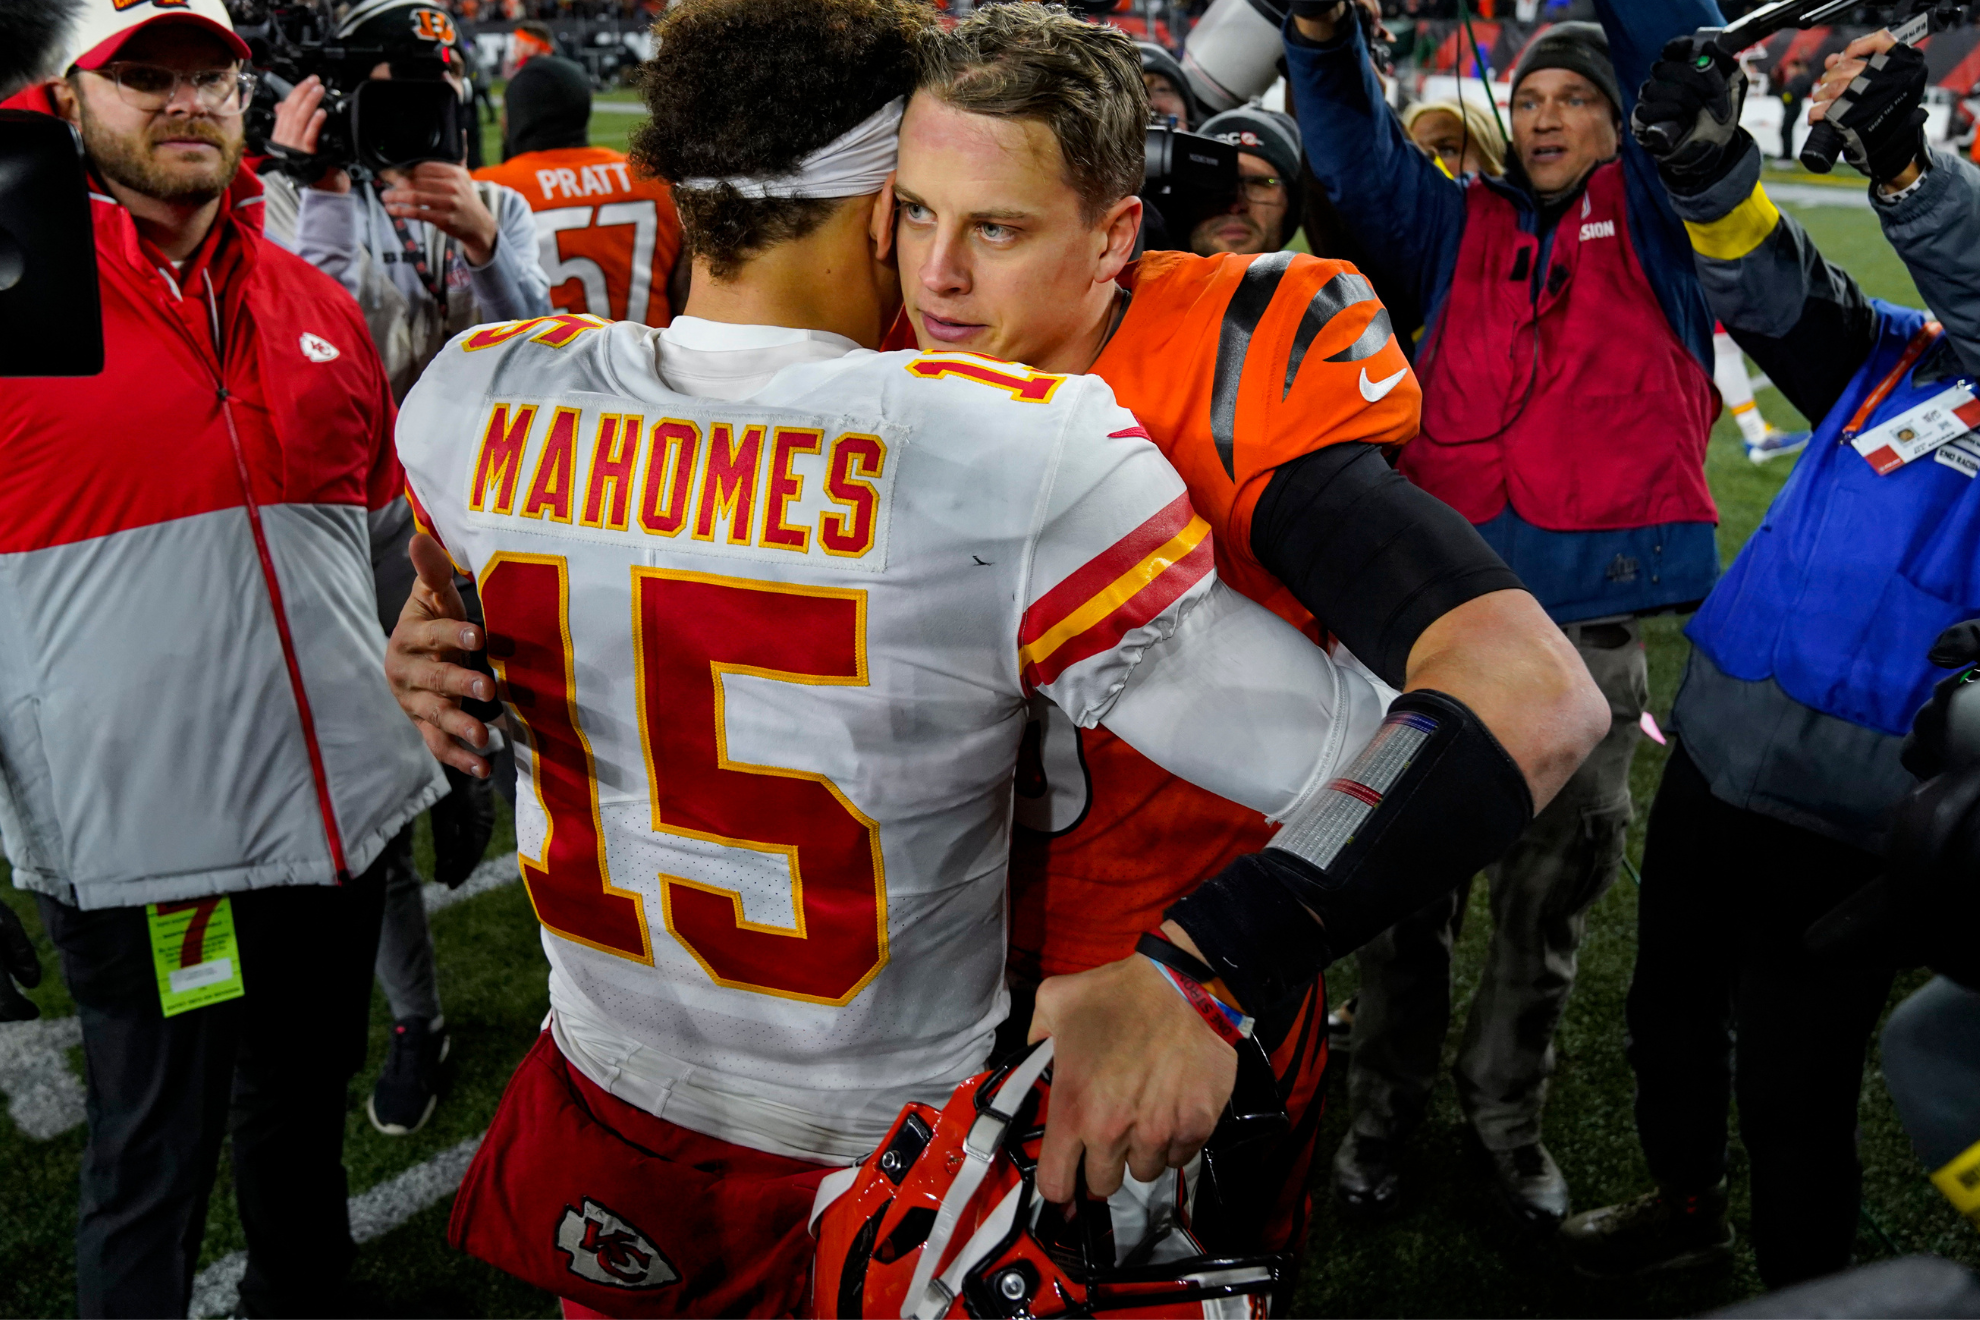 Burrow and Mahomes are set to do battle on New Year's Eve.